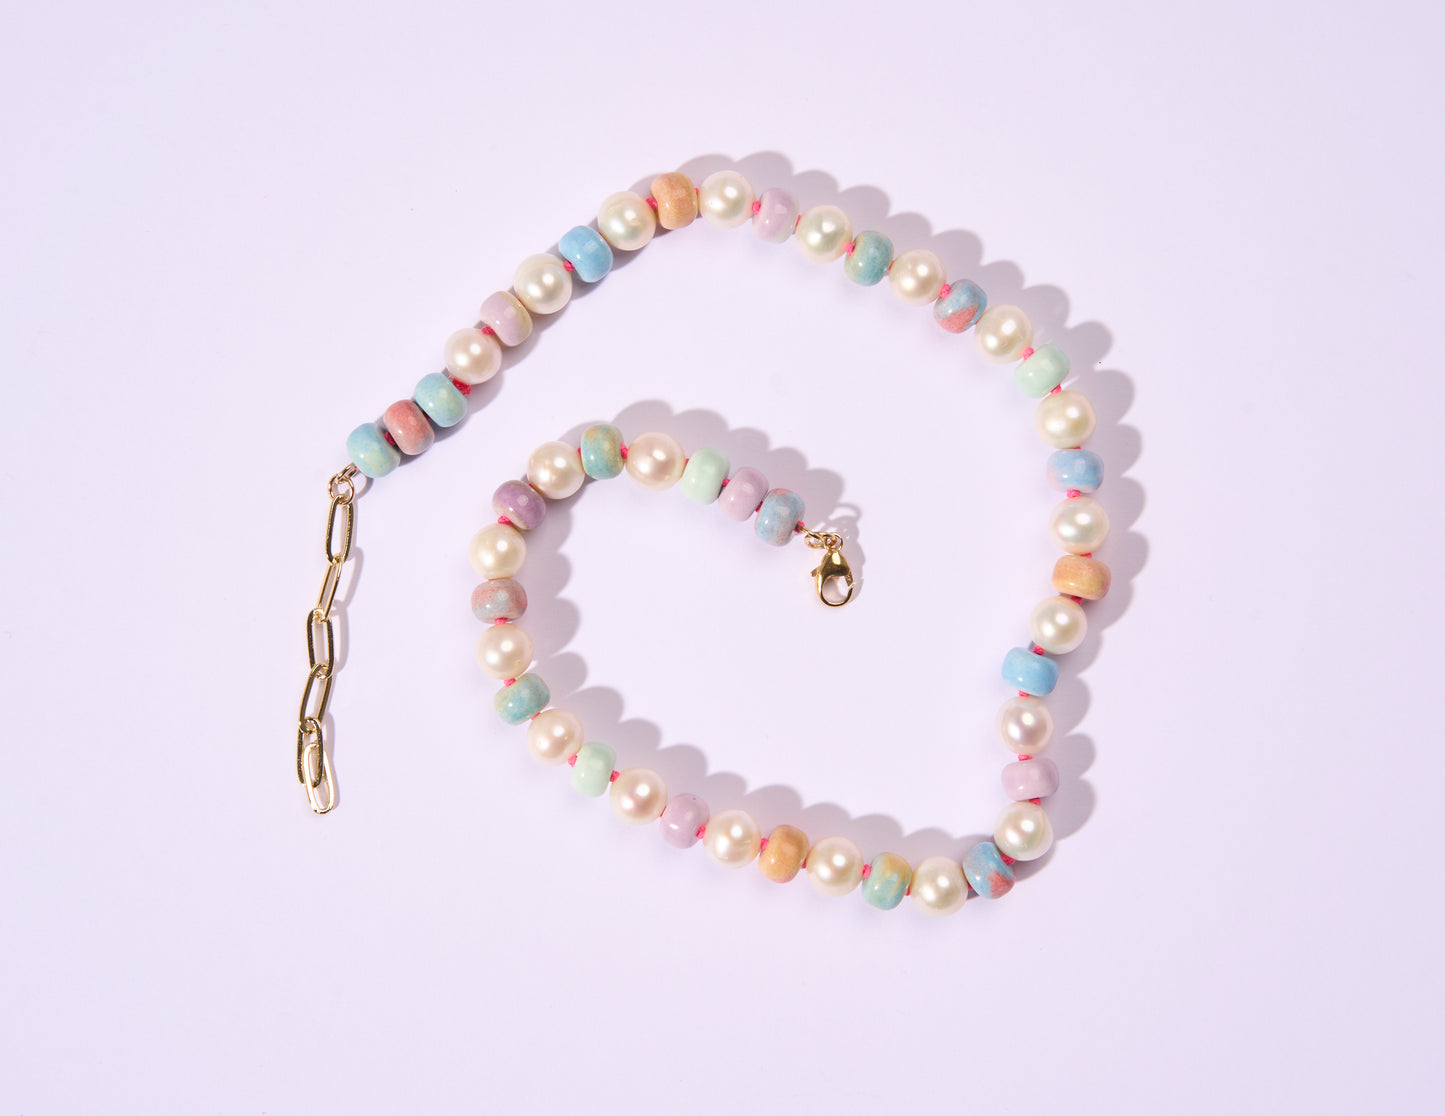 Retro Ombré Pastel Rainbow + Freshwater Pearl Tie Dyed Gemstone Candy Necklace